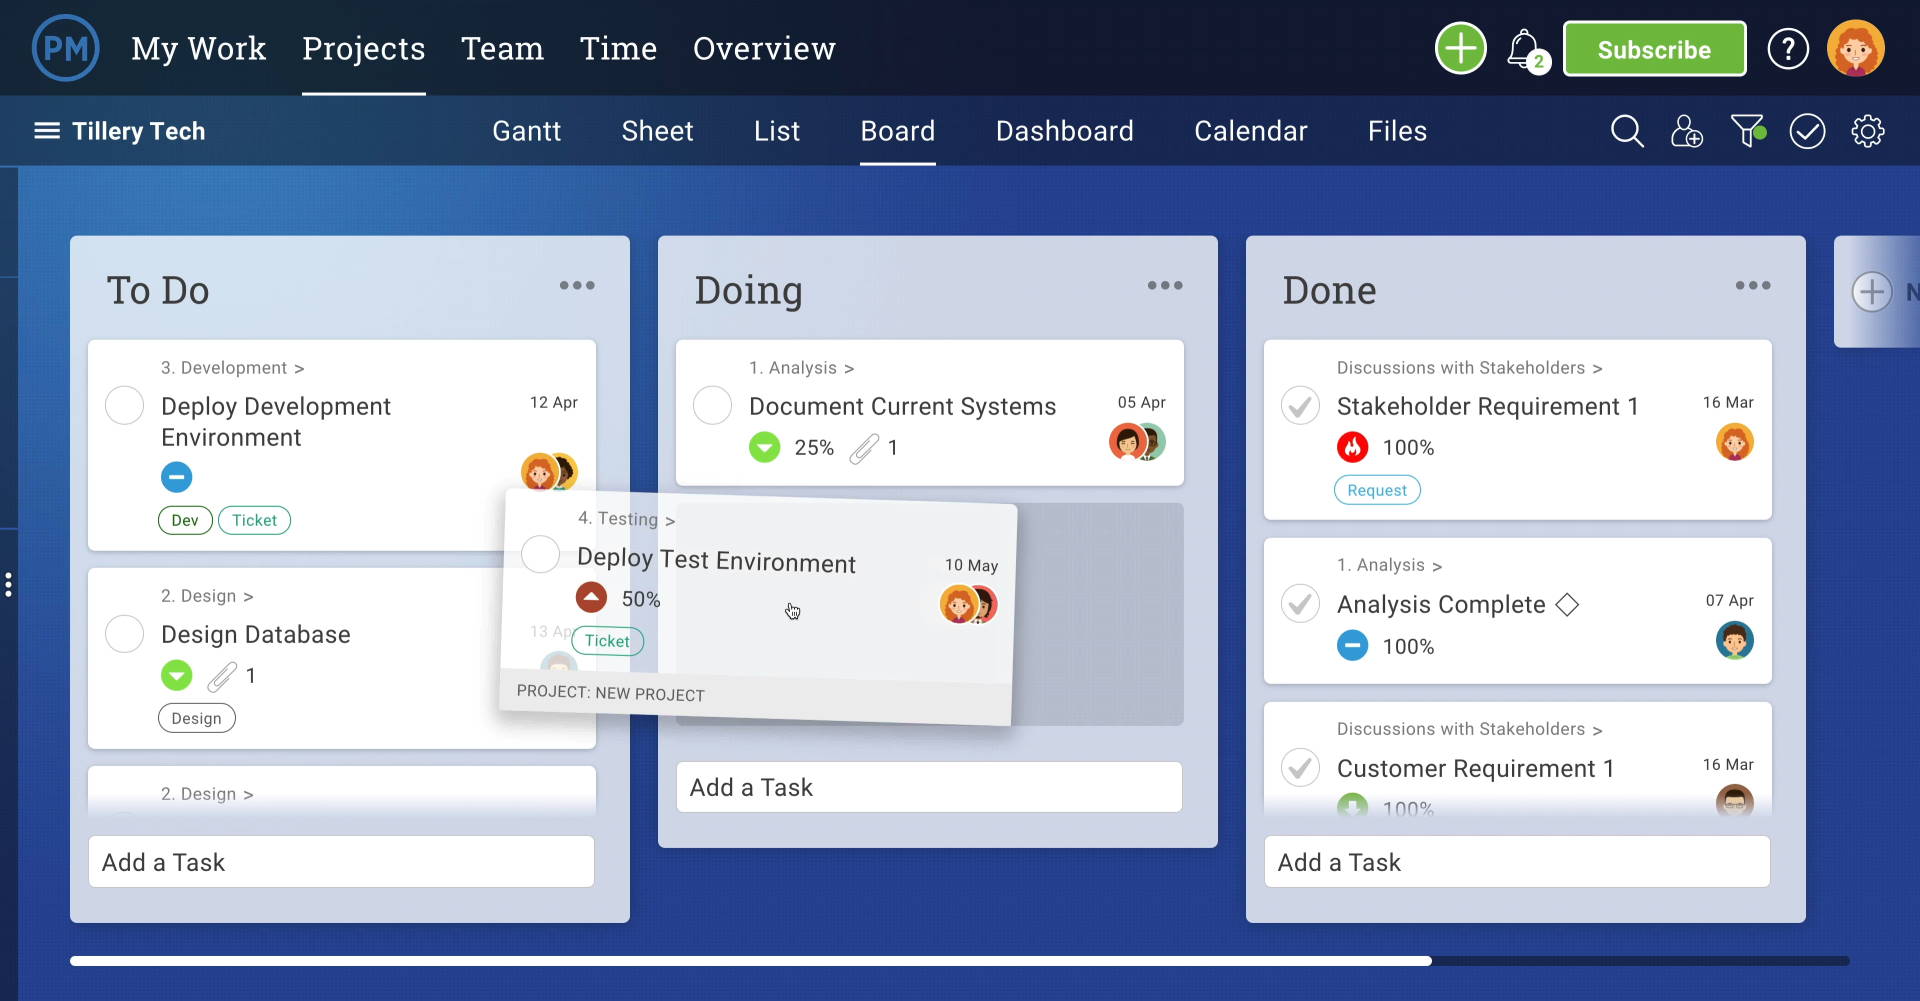 ProjectManager's kanban board project view